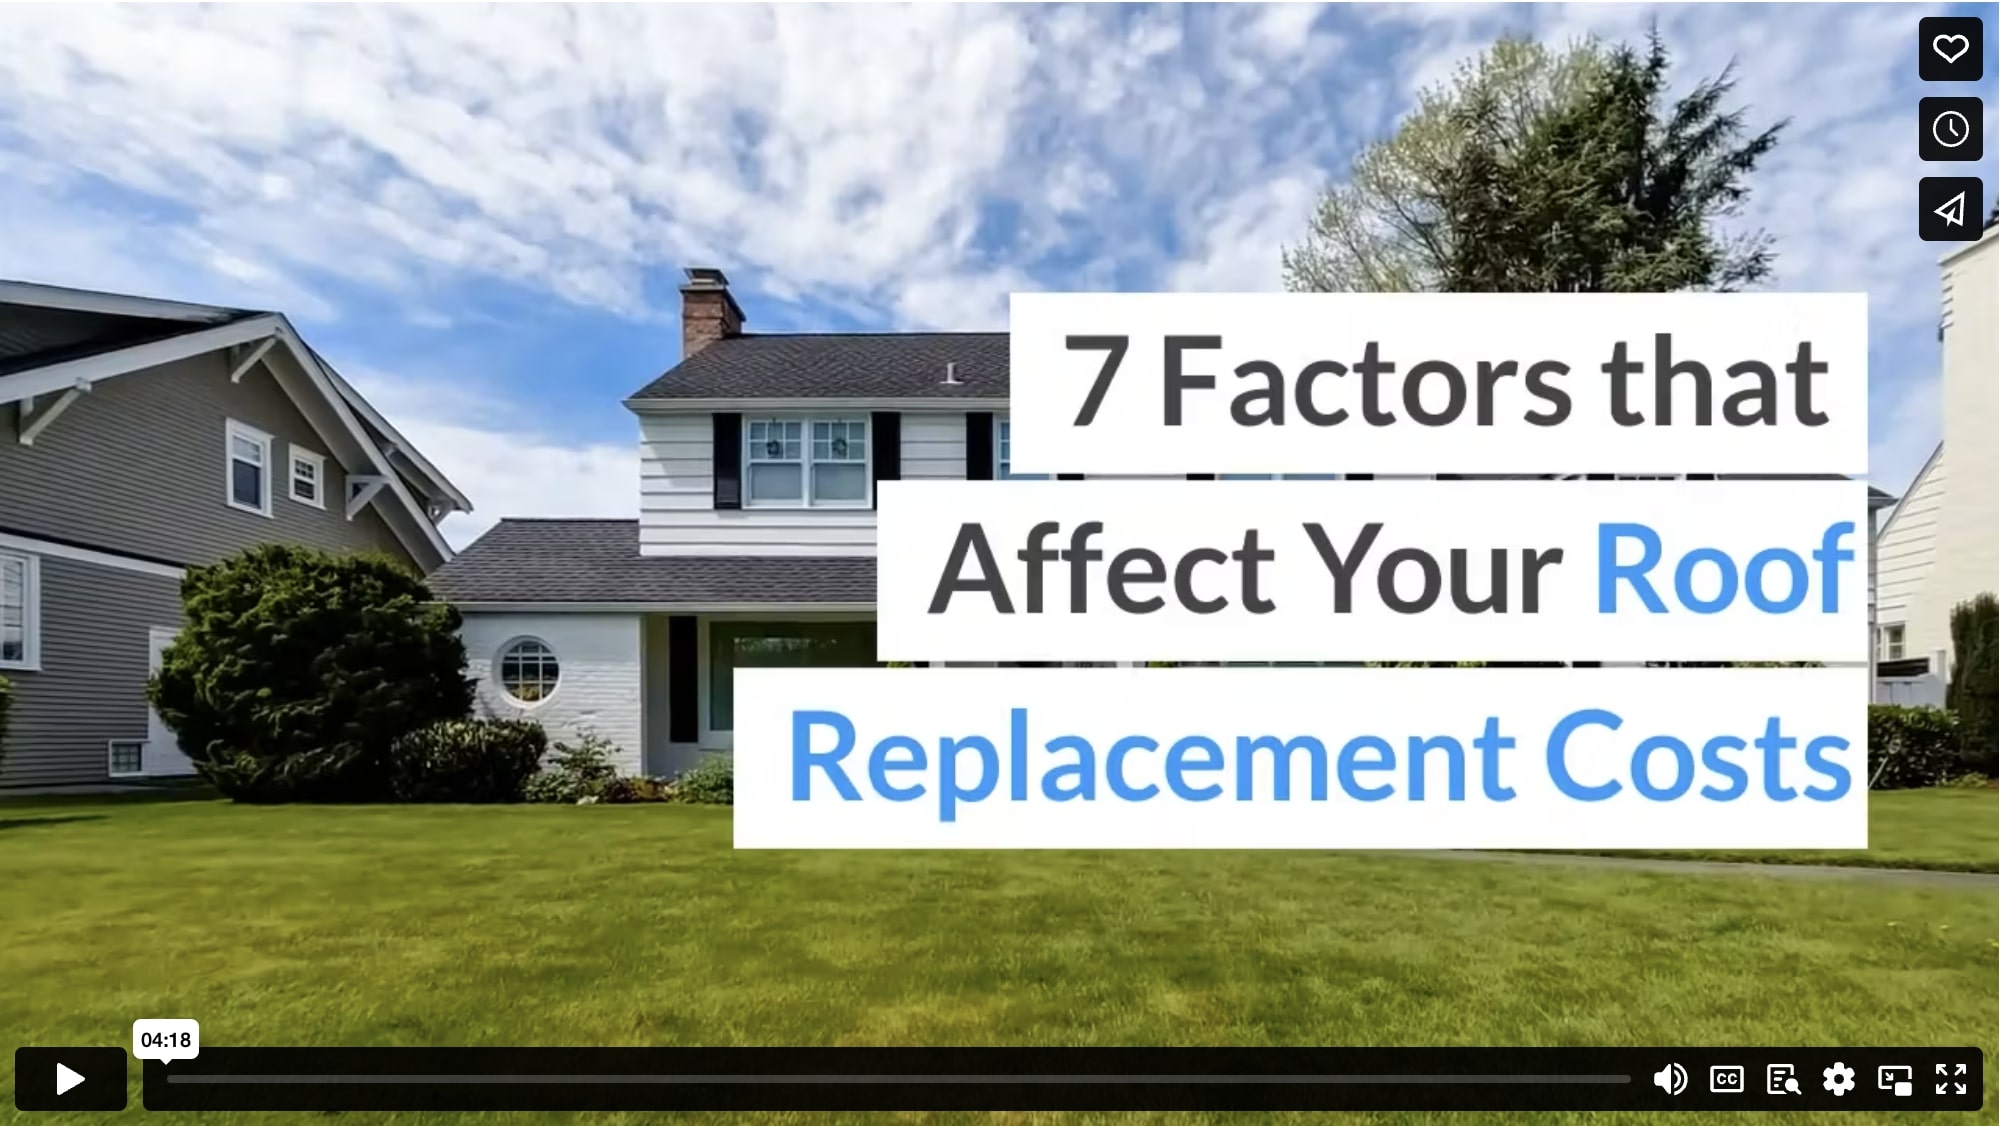 7 Factors that Affect Your Roof Replacement Costs